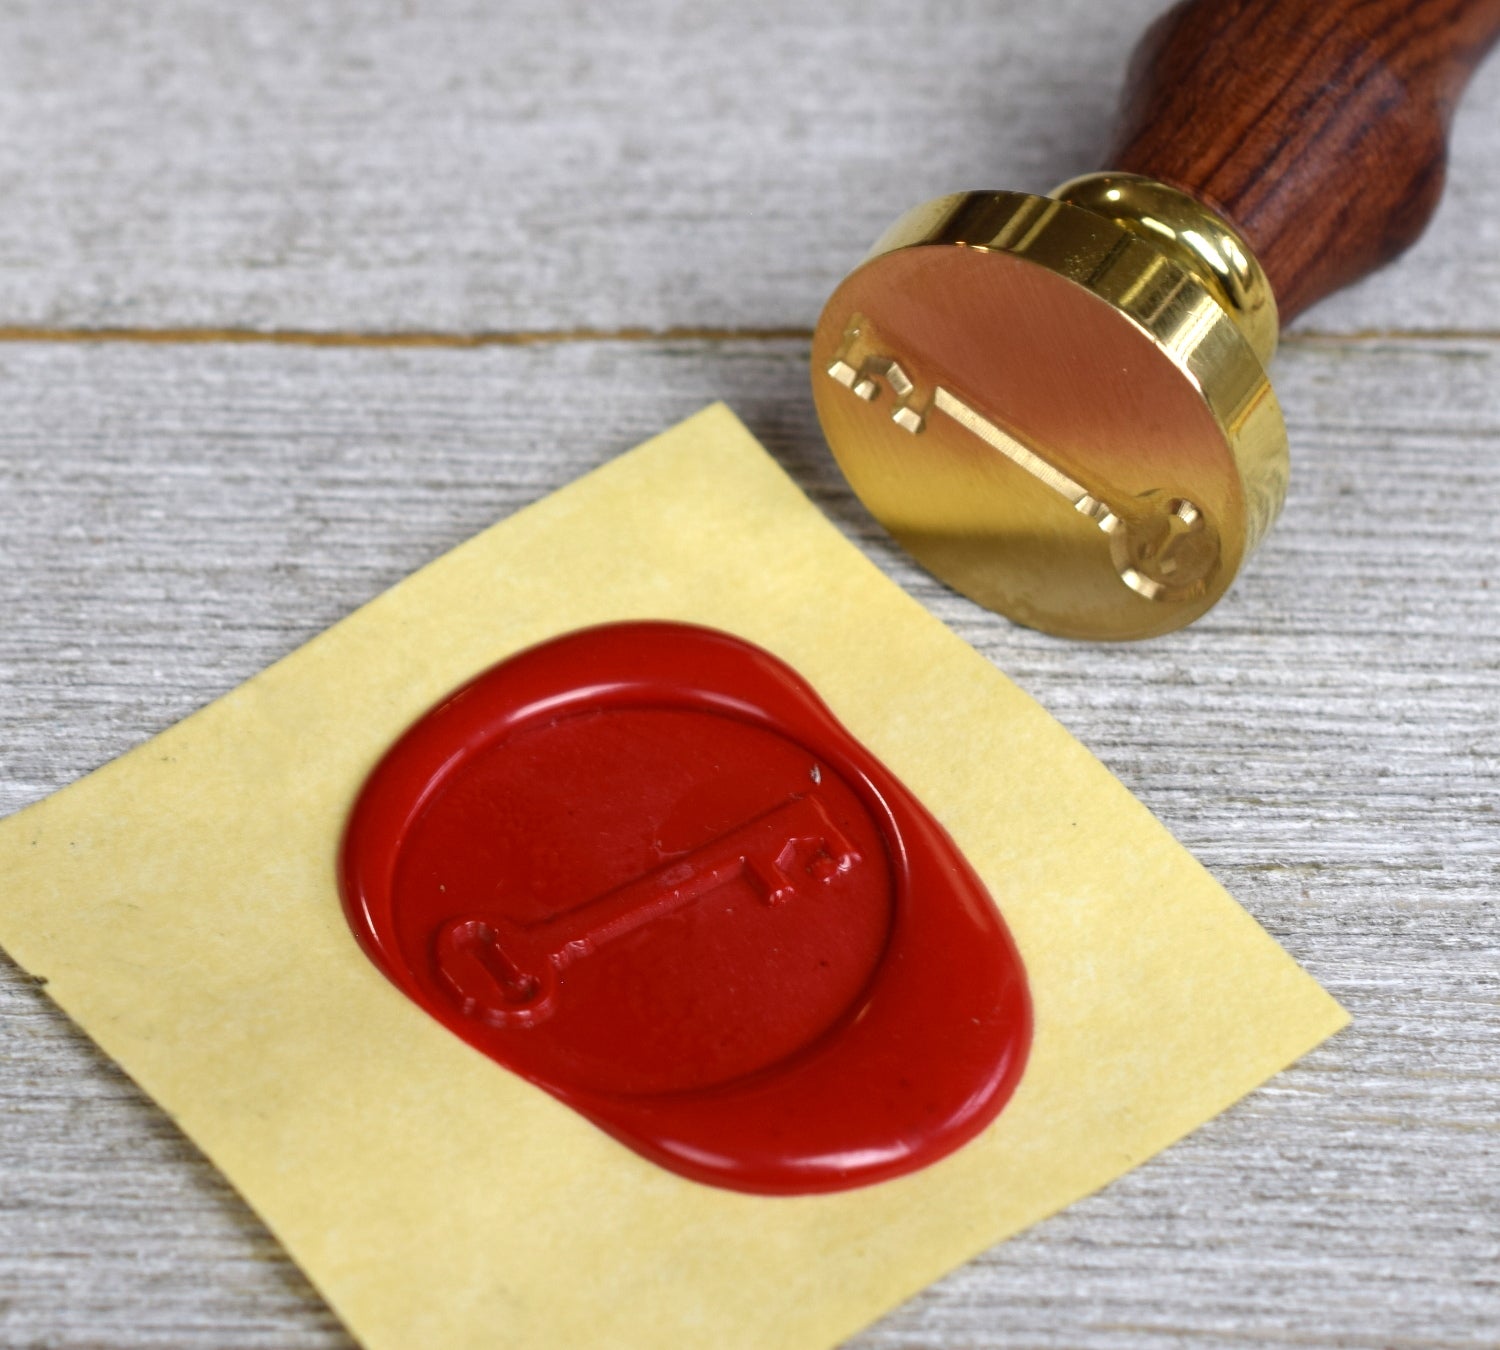 Merry Christmas Script Wax Seal Stamp with Black Wood Handle